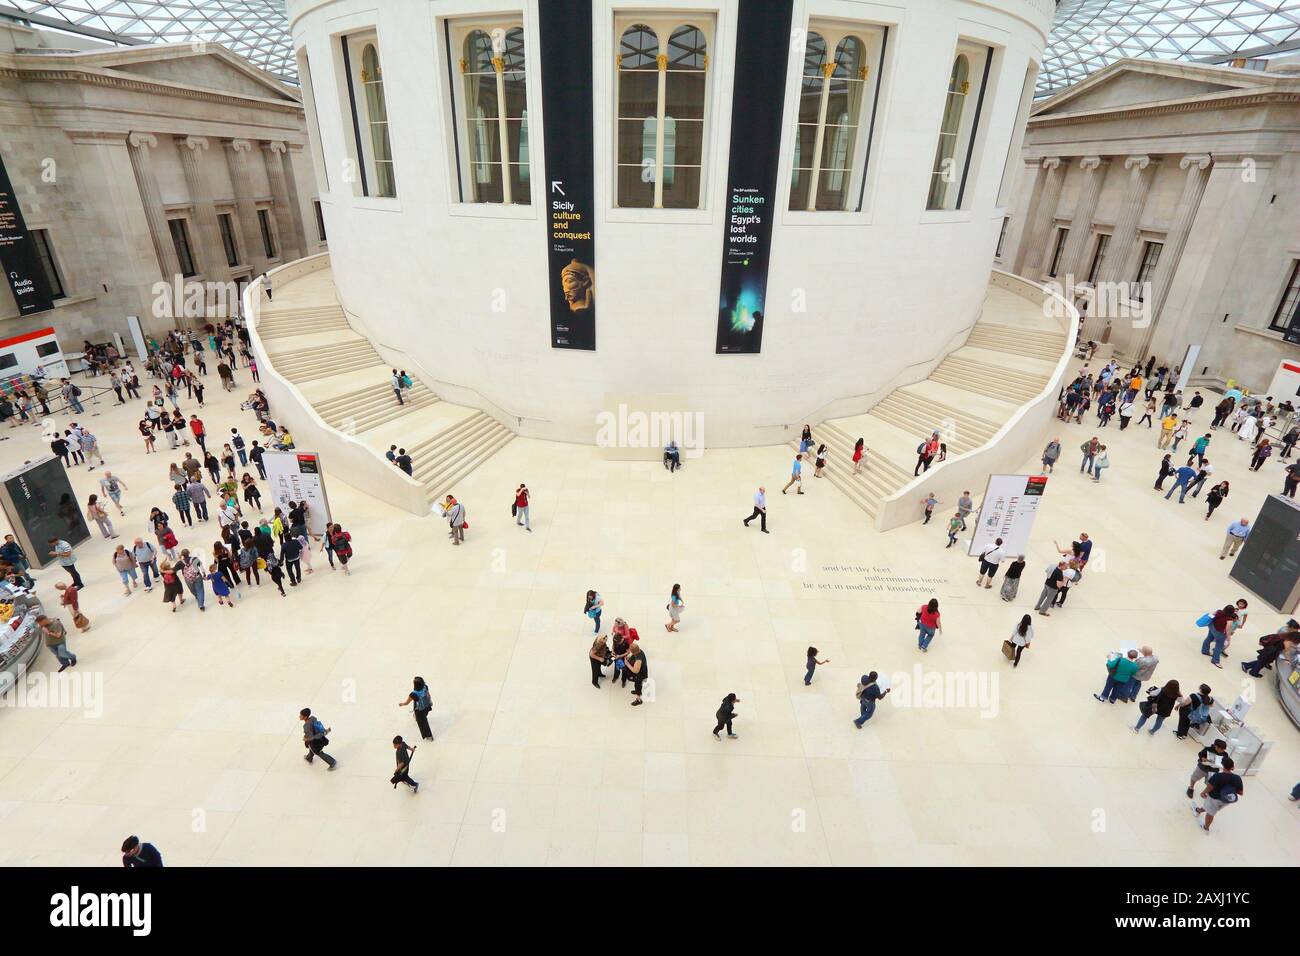 LONDON, UK - JULY 9, 2016: People visit British Museum Great Court in London. The museum was established in 1753 and holds approximately 8 million obj Stock Photo